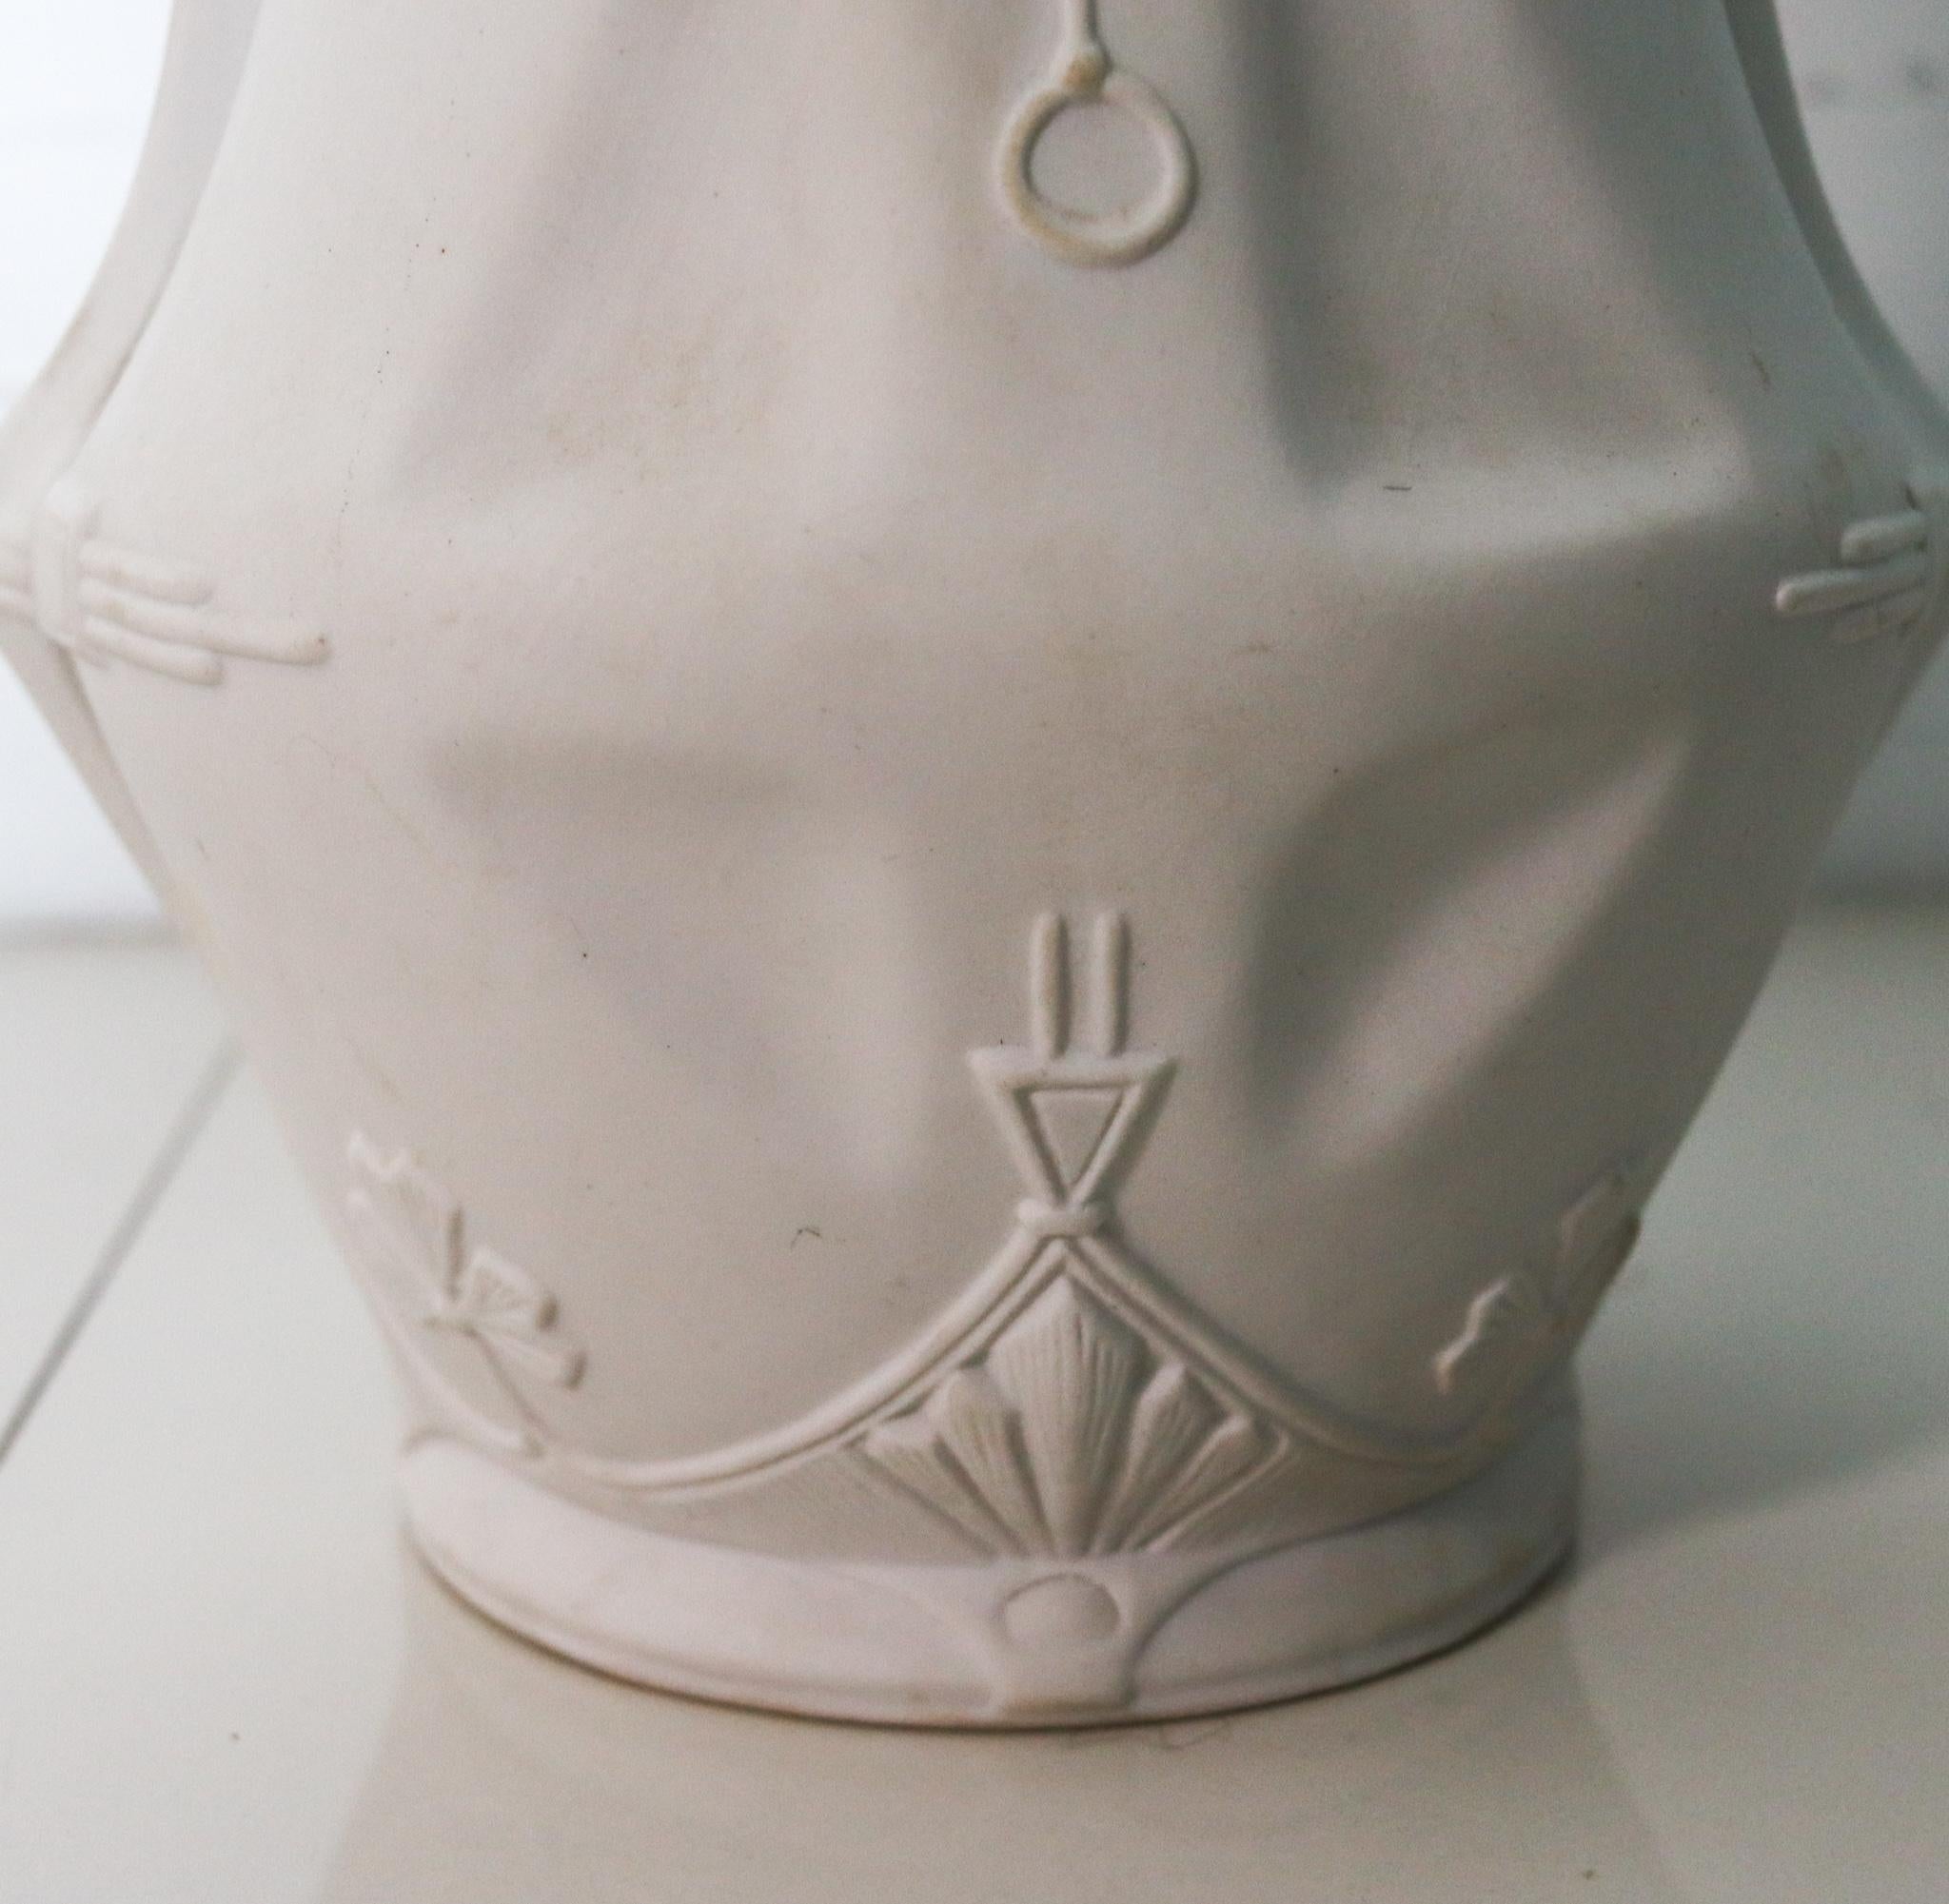 Czech Secessionist Art Nouveau 1920 Tall Vase in Biscuit White Porcelain In Excellent Condition For Sale In Miami, FL